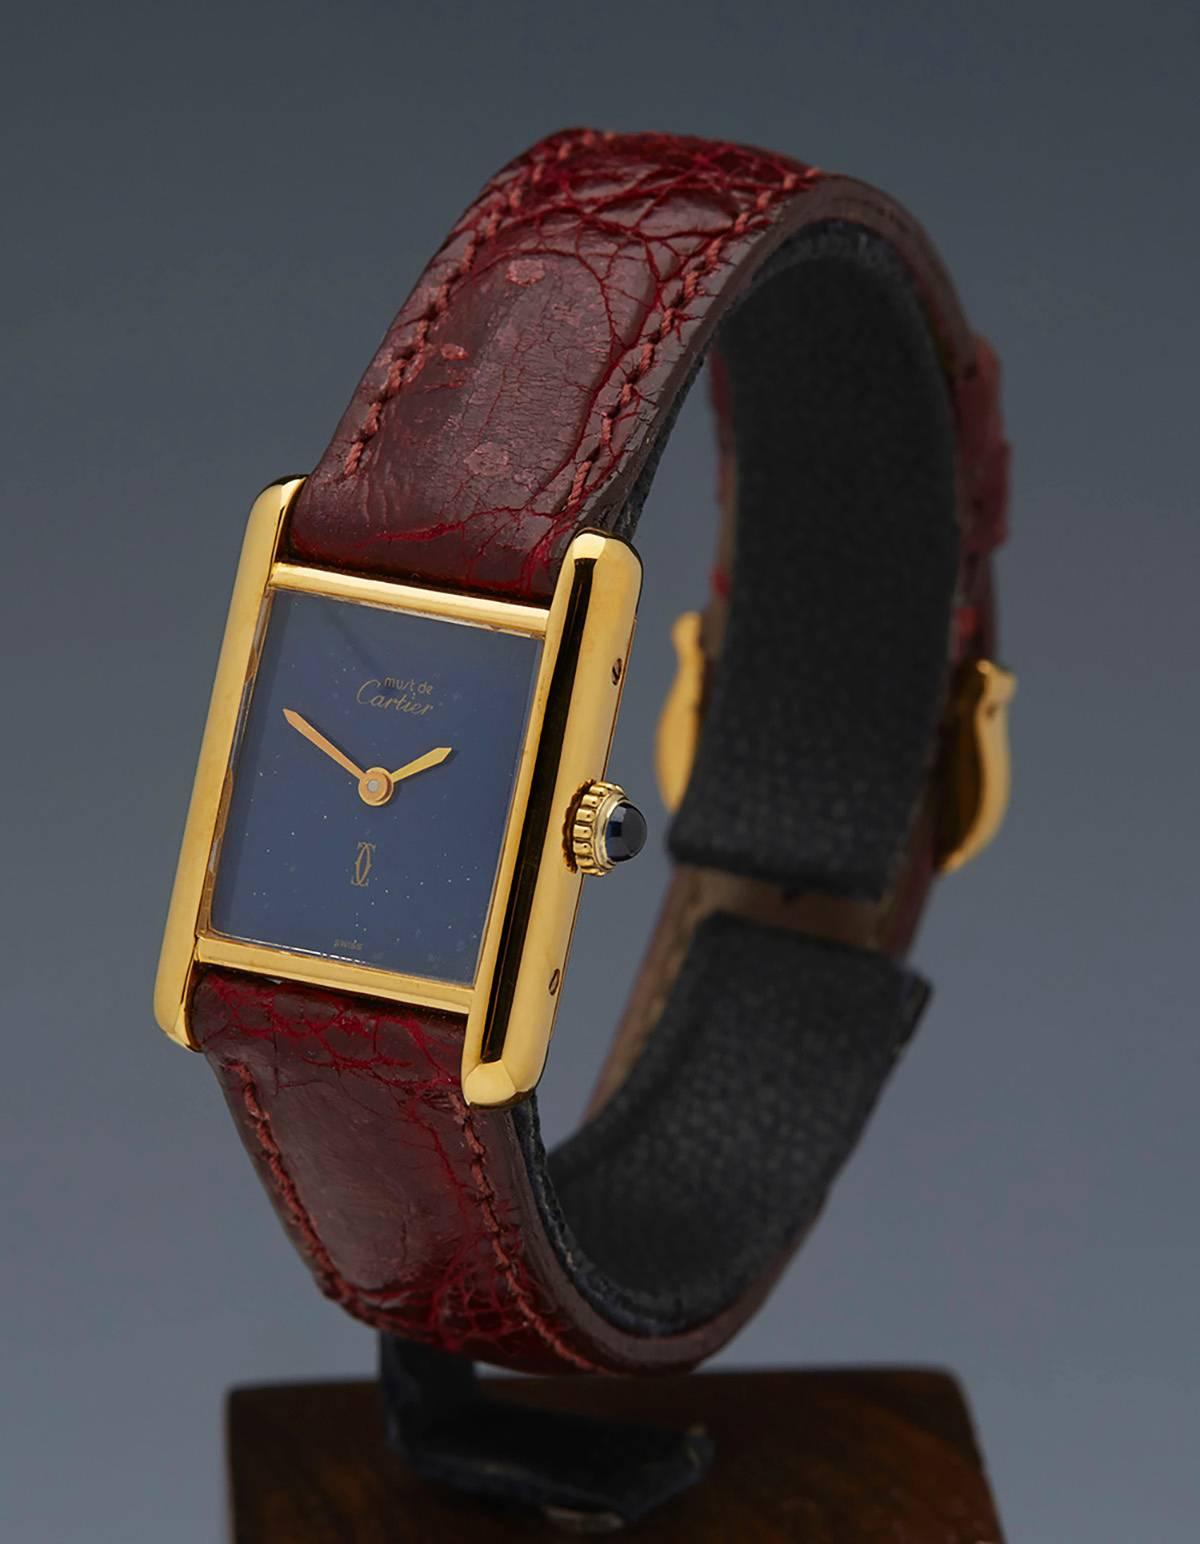 Specifications

Movement: Mechanical Manual Wind
Case: 18k Yellow Gold Plated 925 Silver
Case Diameter: 22mm by 28mm
Dial: Blue Lapiz Dial
Bracelet: Burgundy Leather
Strap Length: Adjustable
Strap Width: At Case - 14mm. At Buckle -